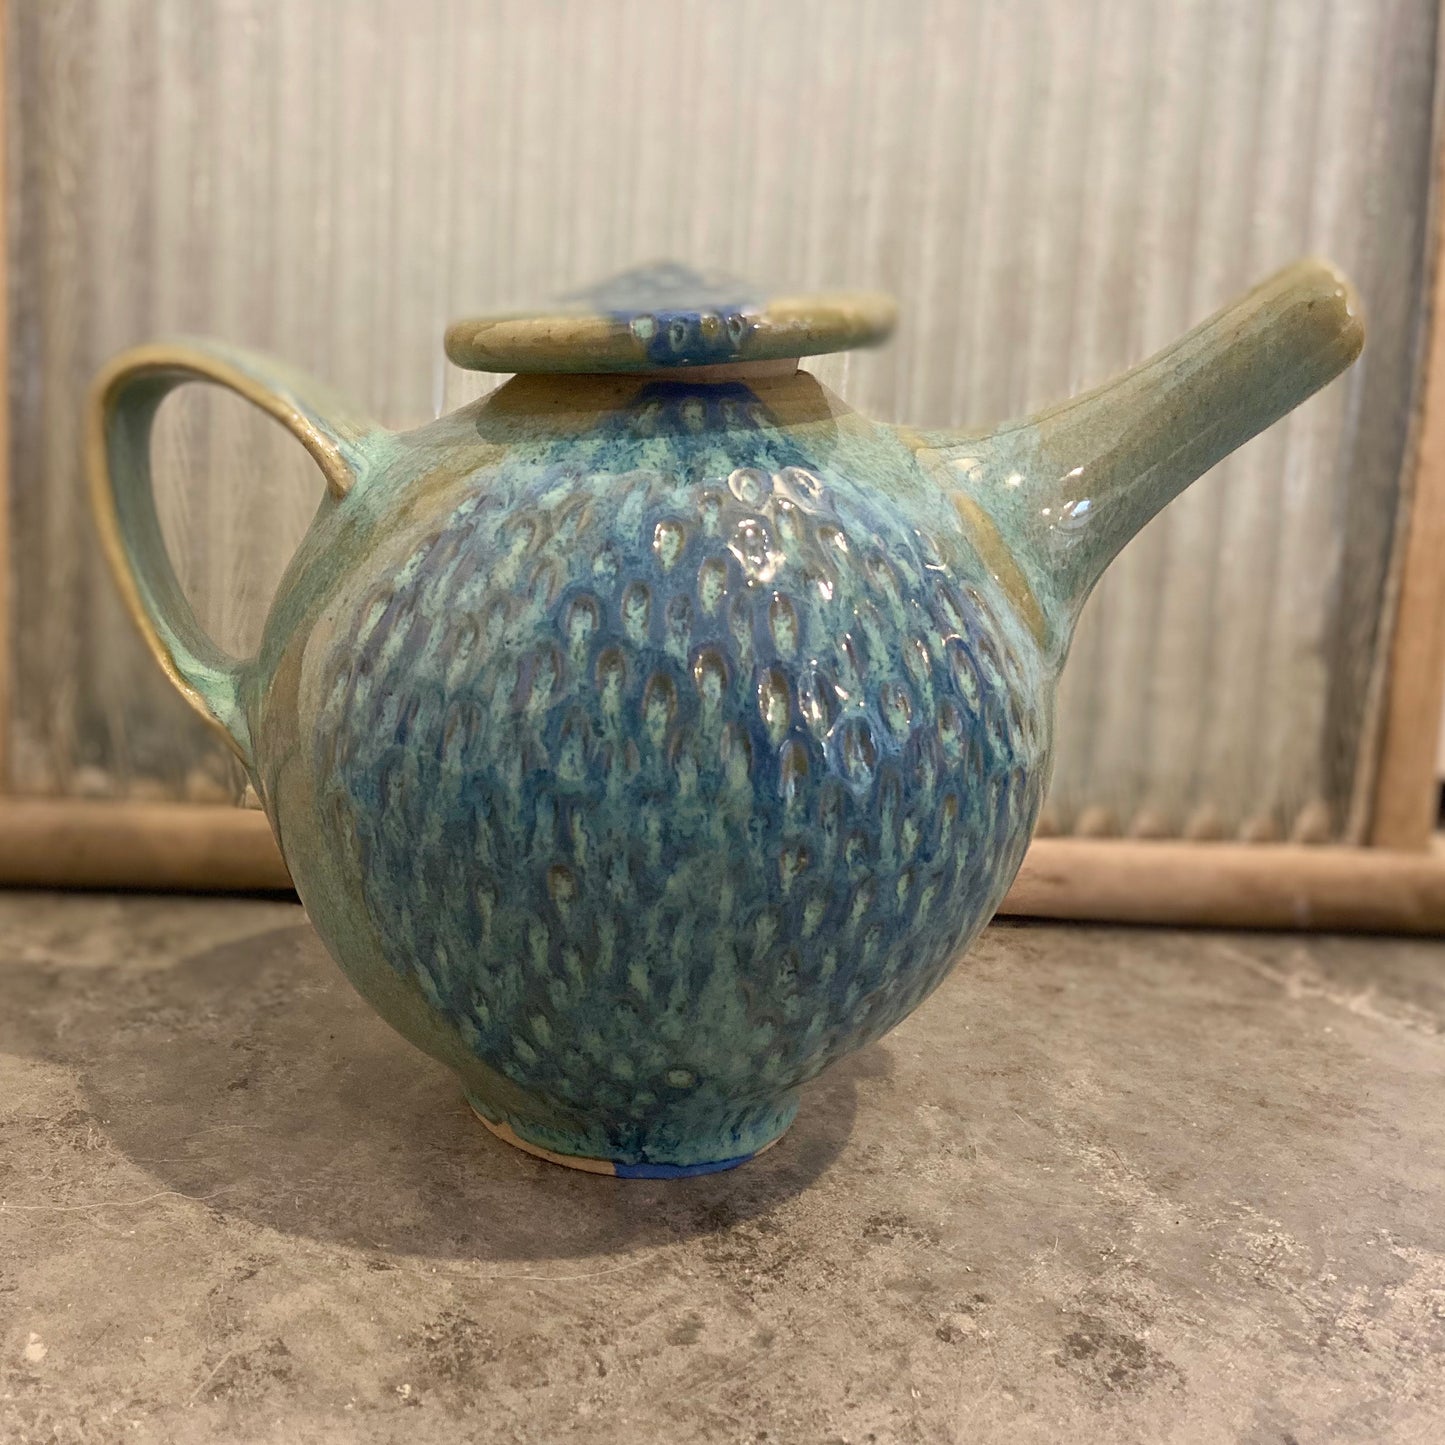 Carved Turquoise Teapot